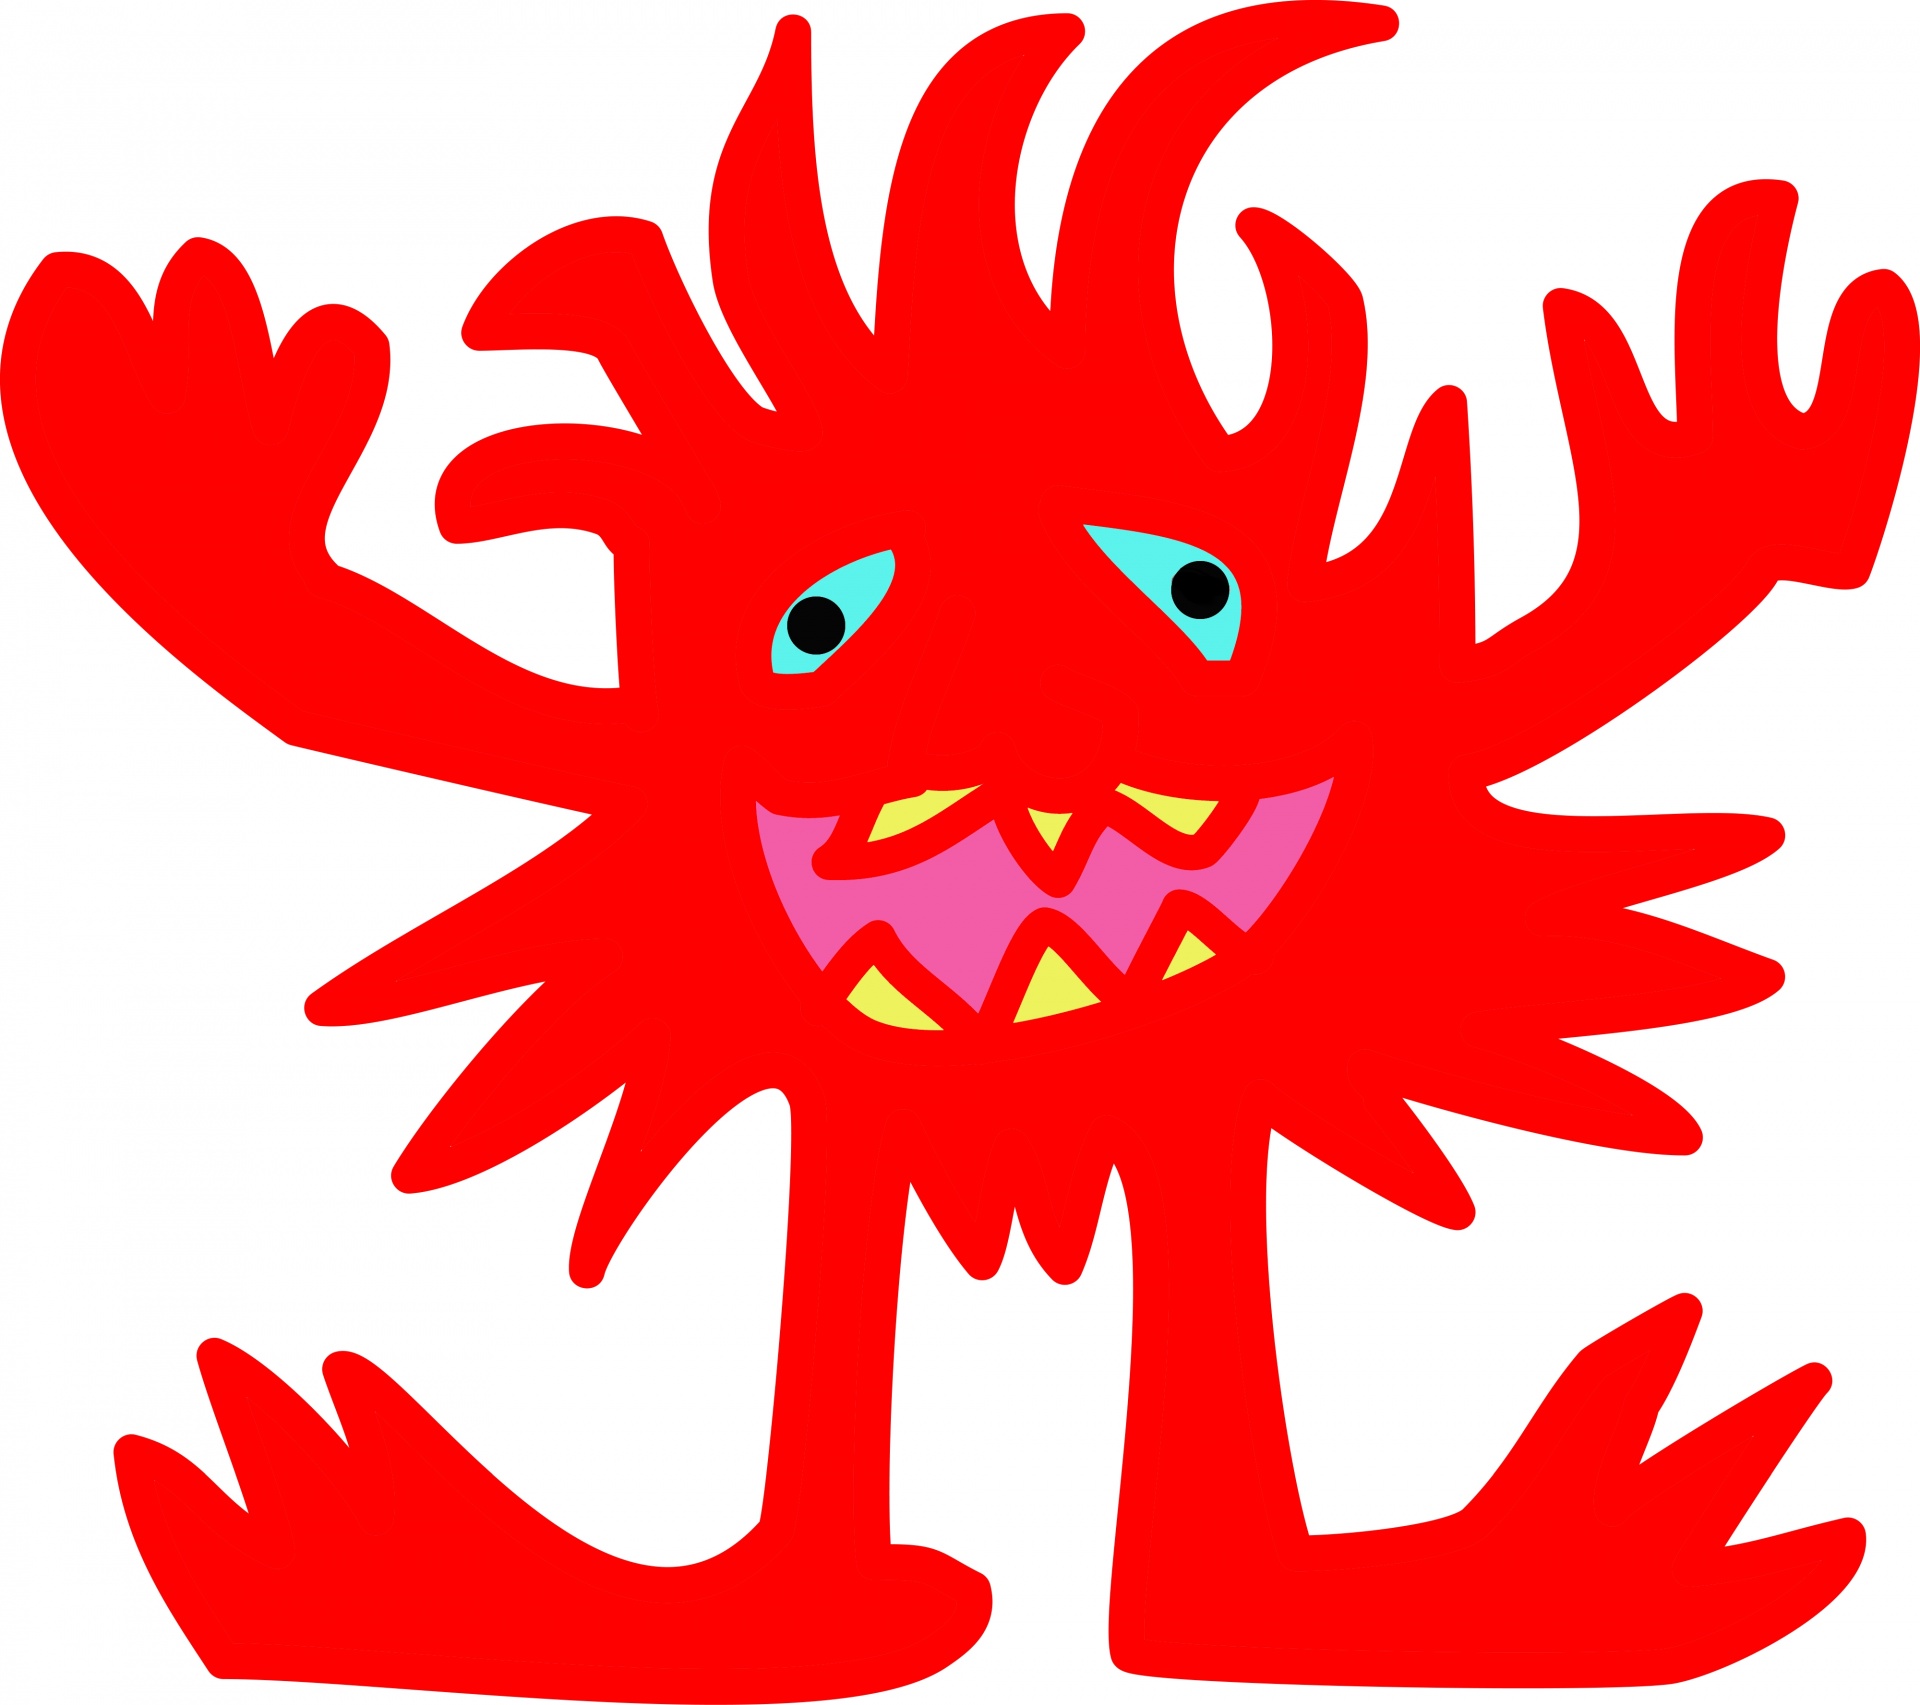 red,cartoon,character,cheerful,crazy,creature,cute,doodle,drawing,drawn,fun...